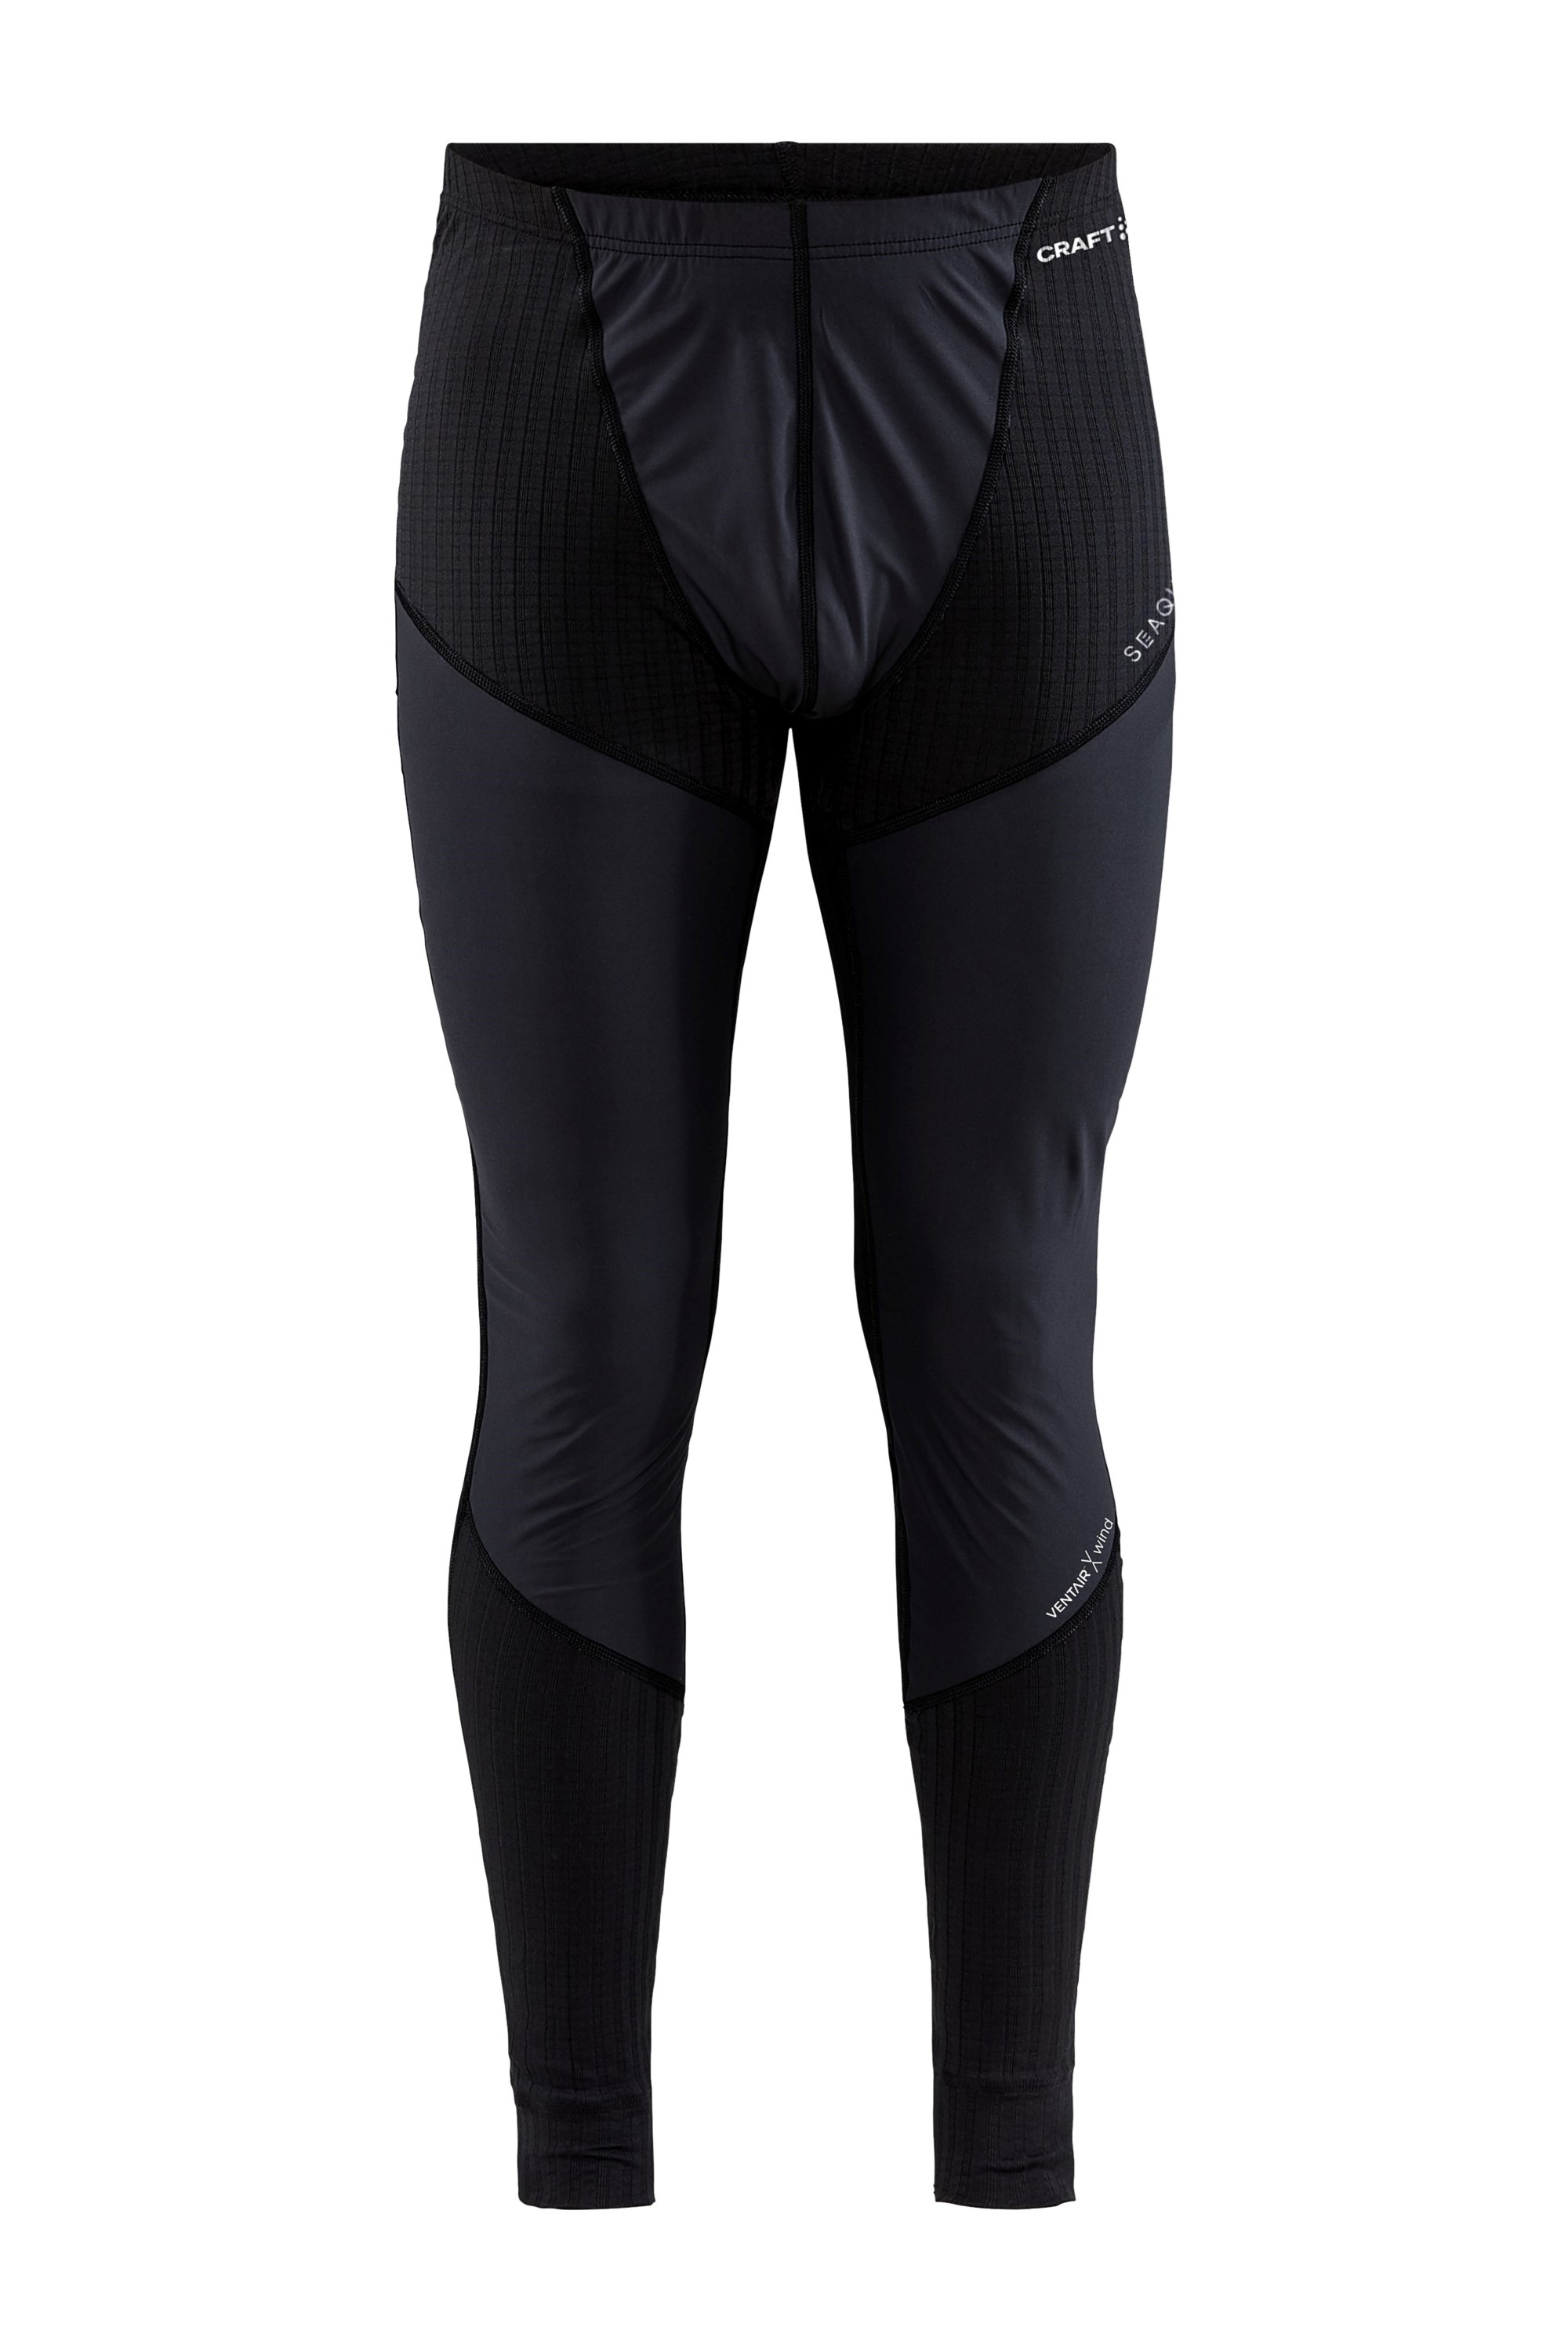 Active Extreme X Mens Wind Baselayer Pants -